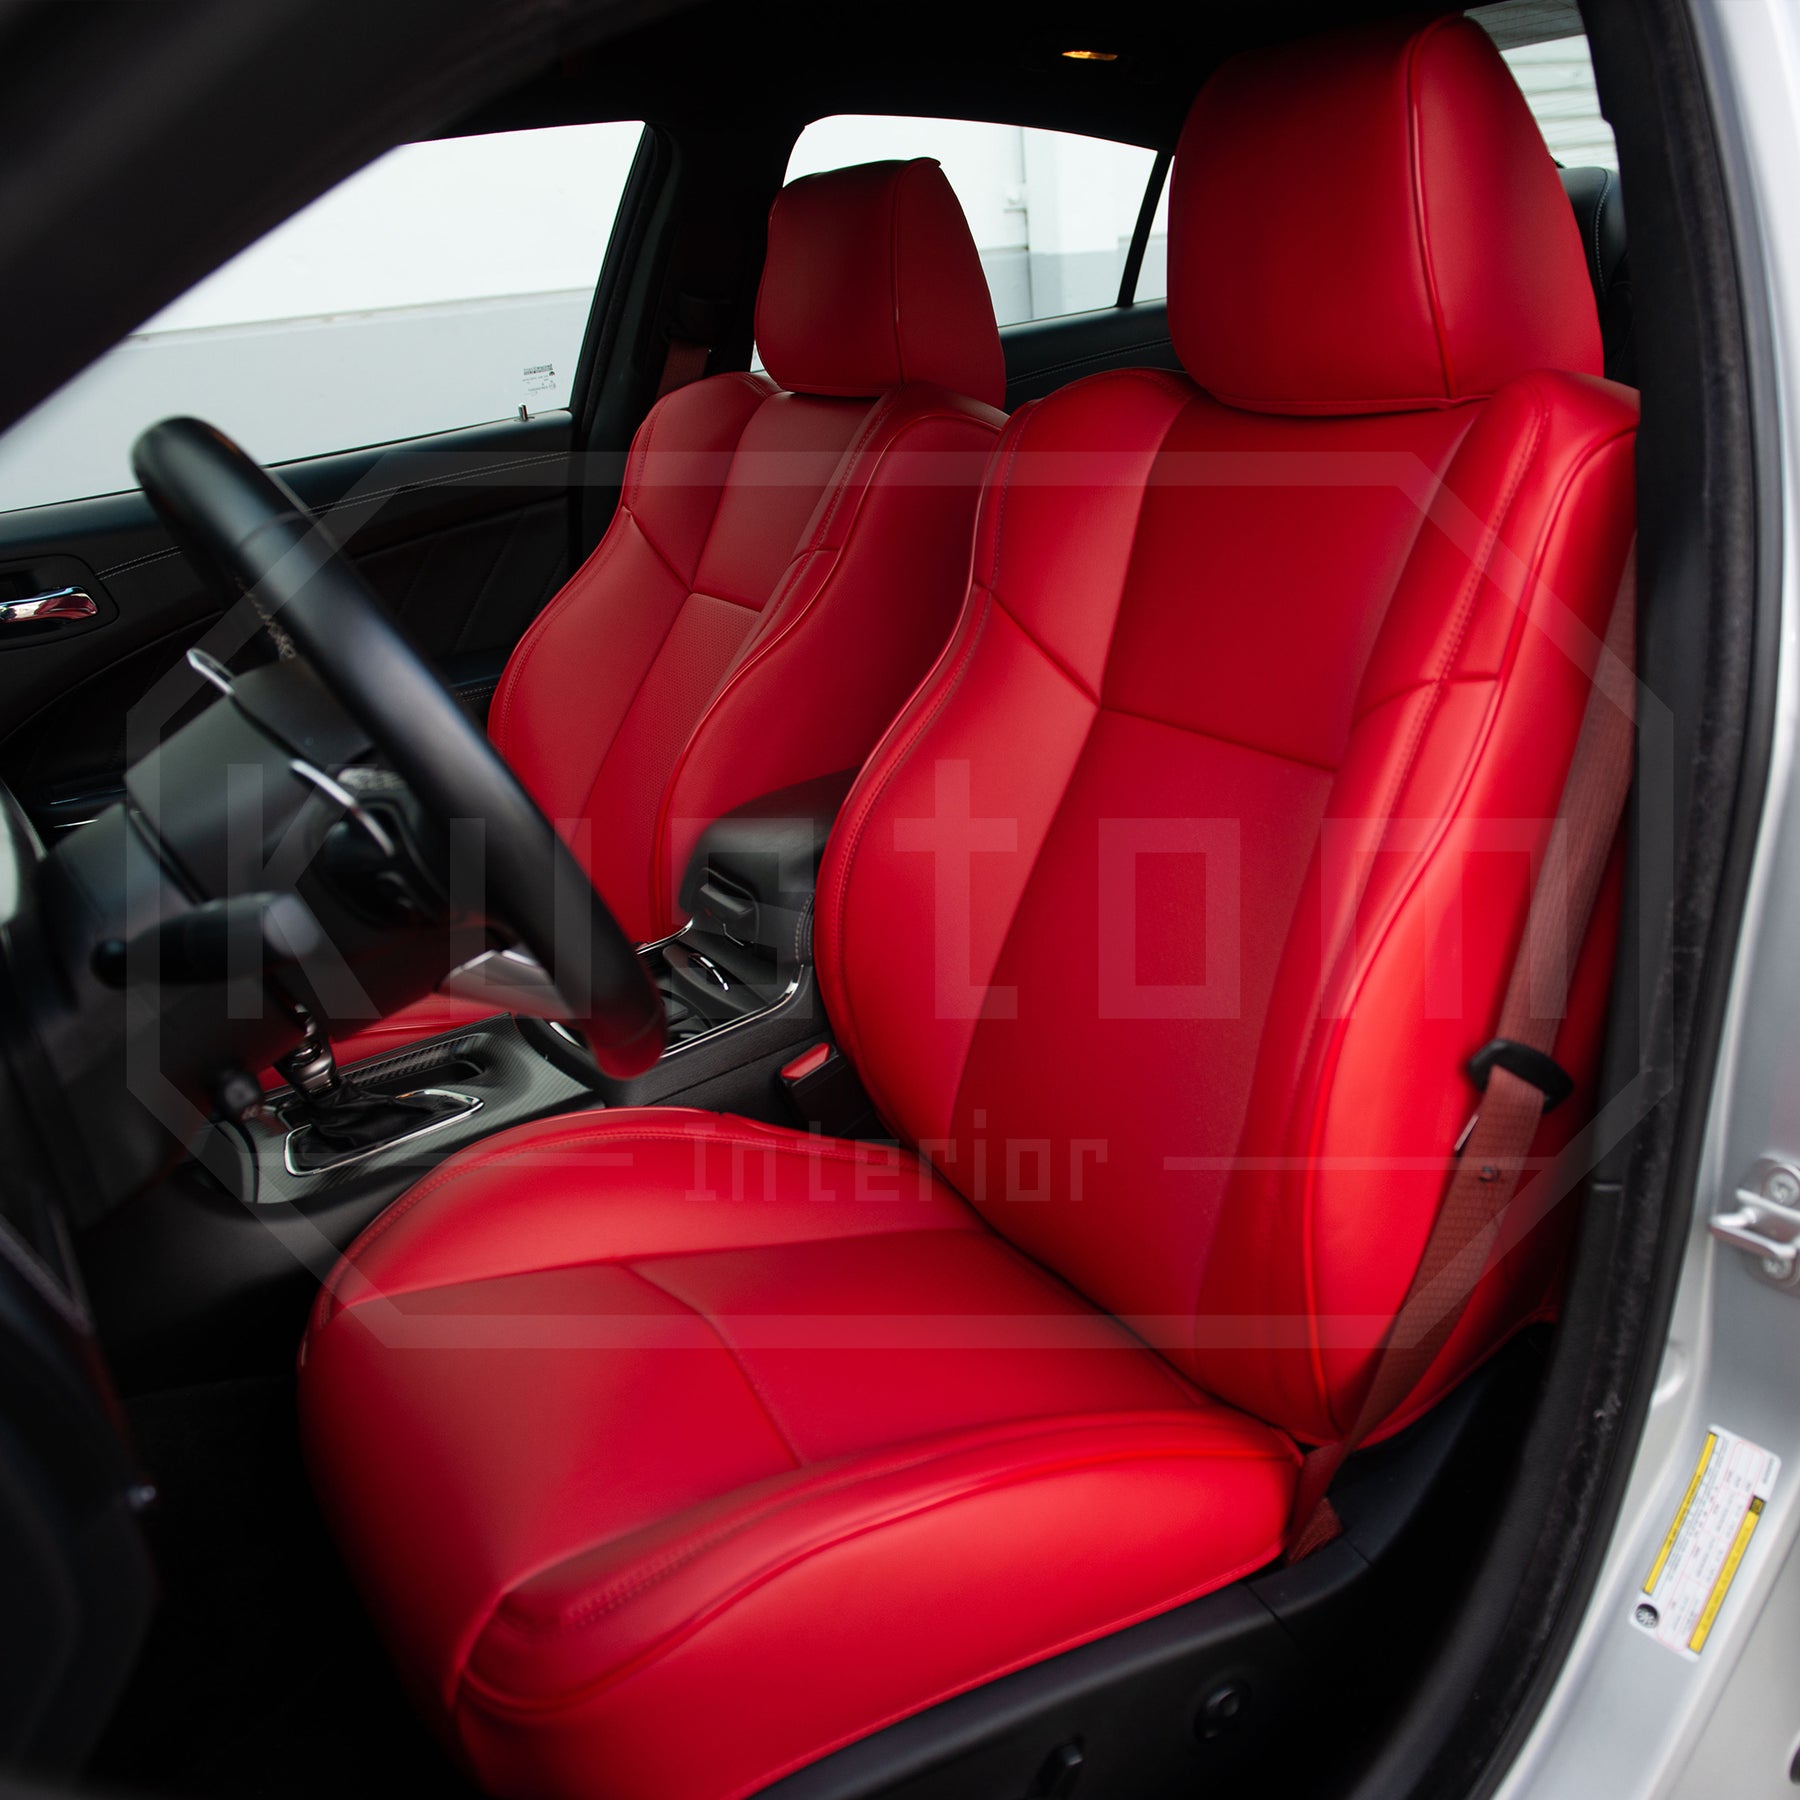 Dodge Challenger Seat Covers, Leather Seats, Interiors